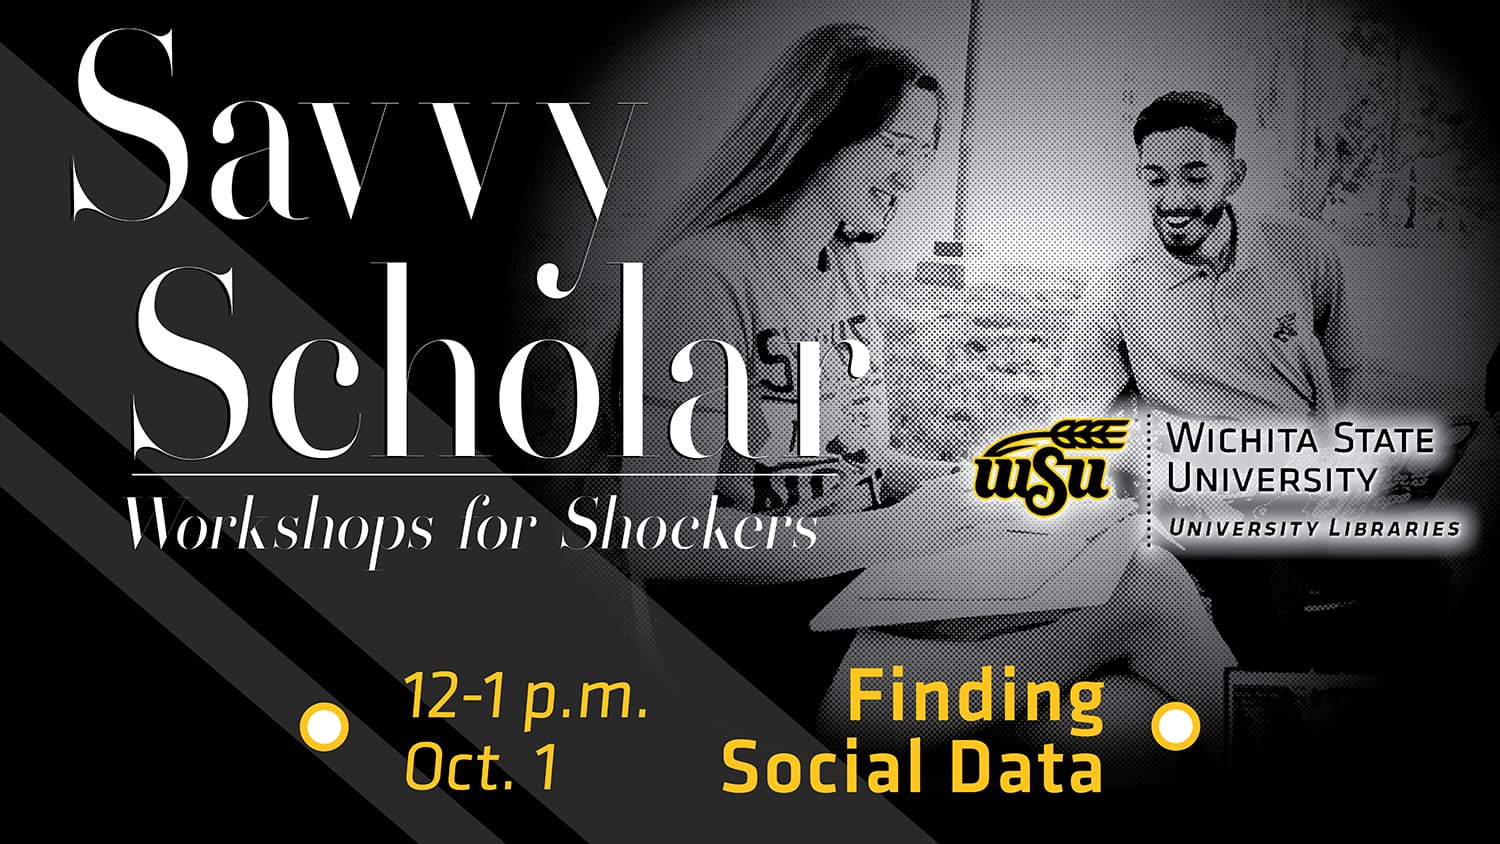 Savvy Scholar workshops for Shockers. Finding Social Data, 12 -1 p.m. Oct. 1.